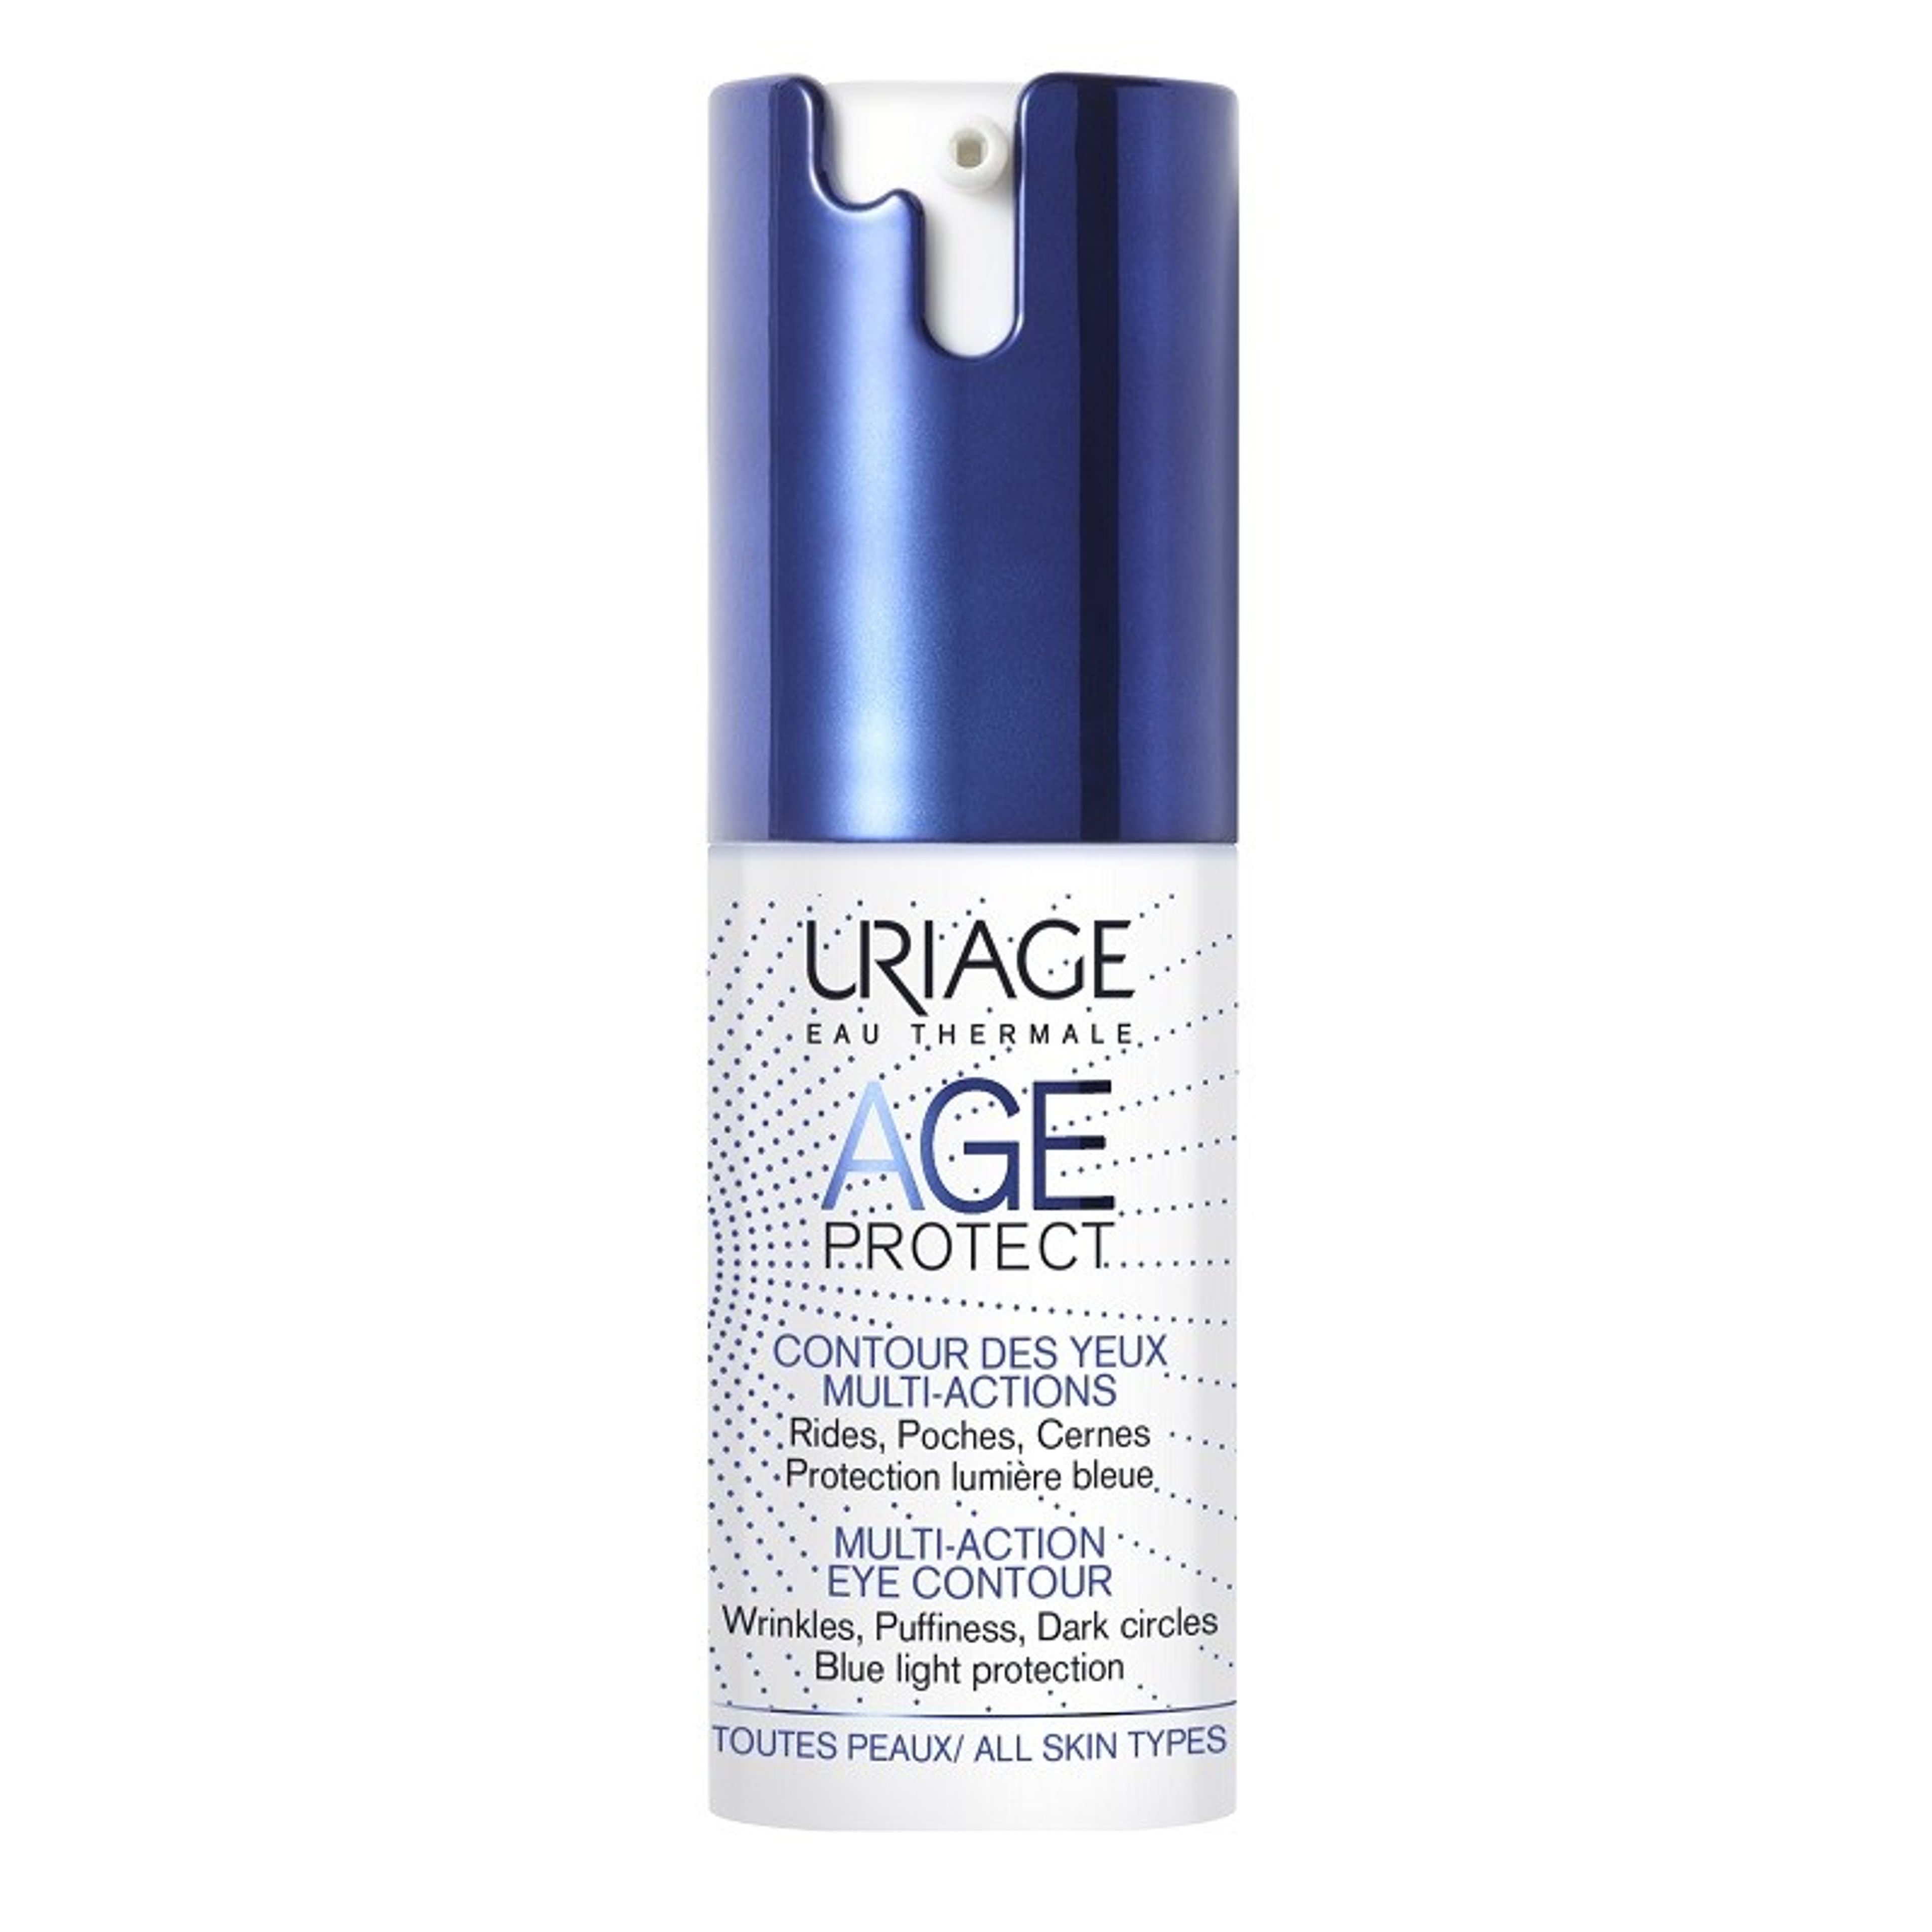 Age Protect Multi-Action Eye Contour